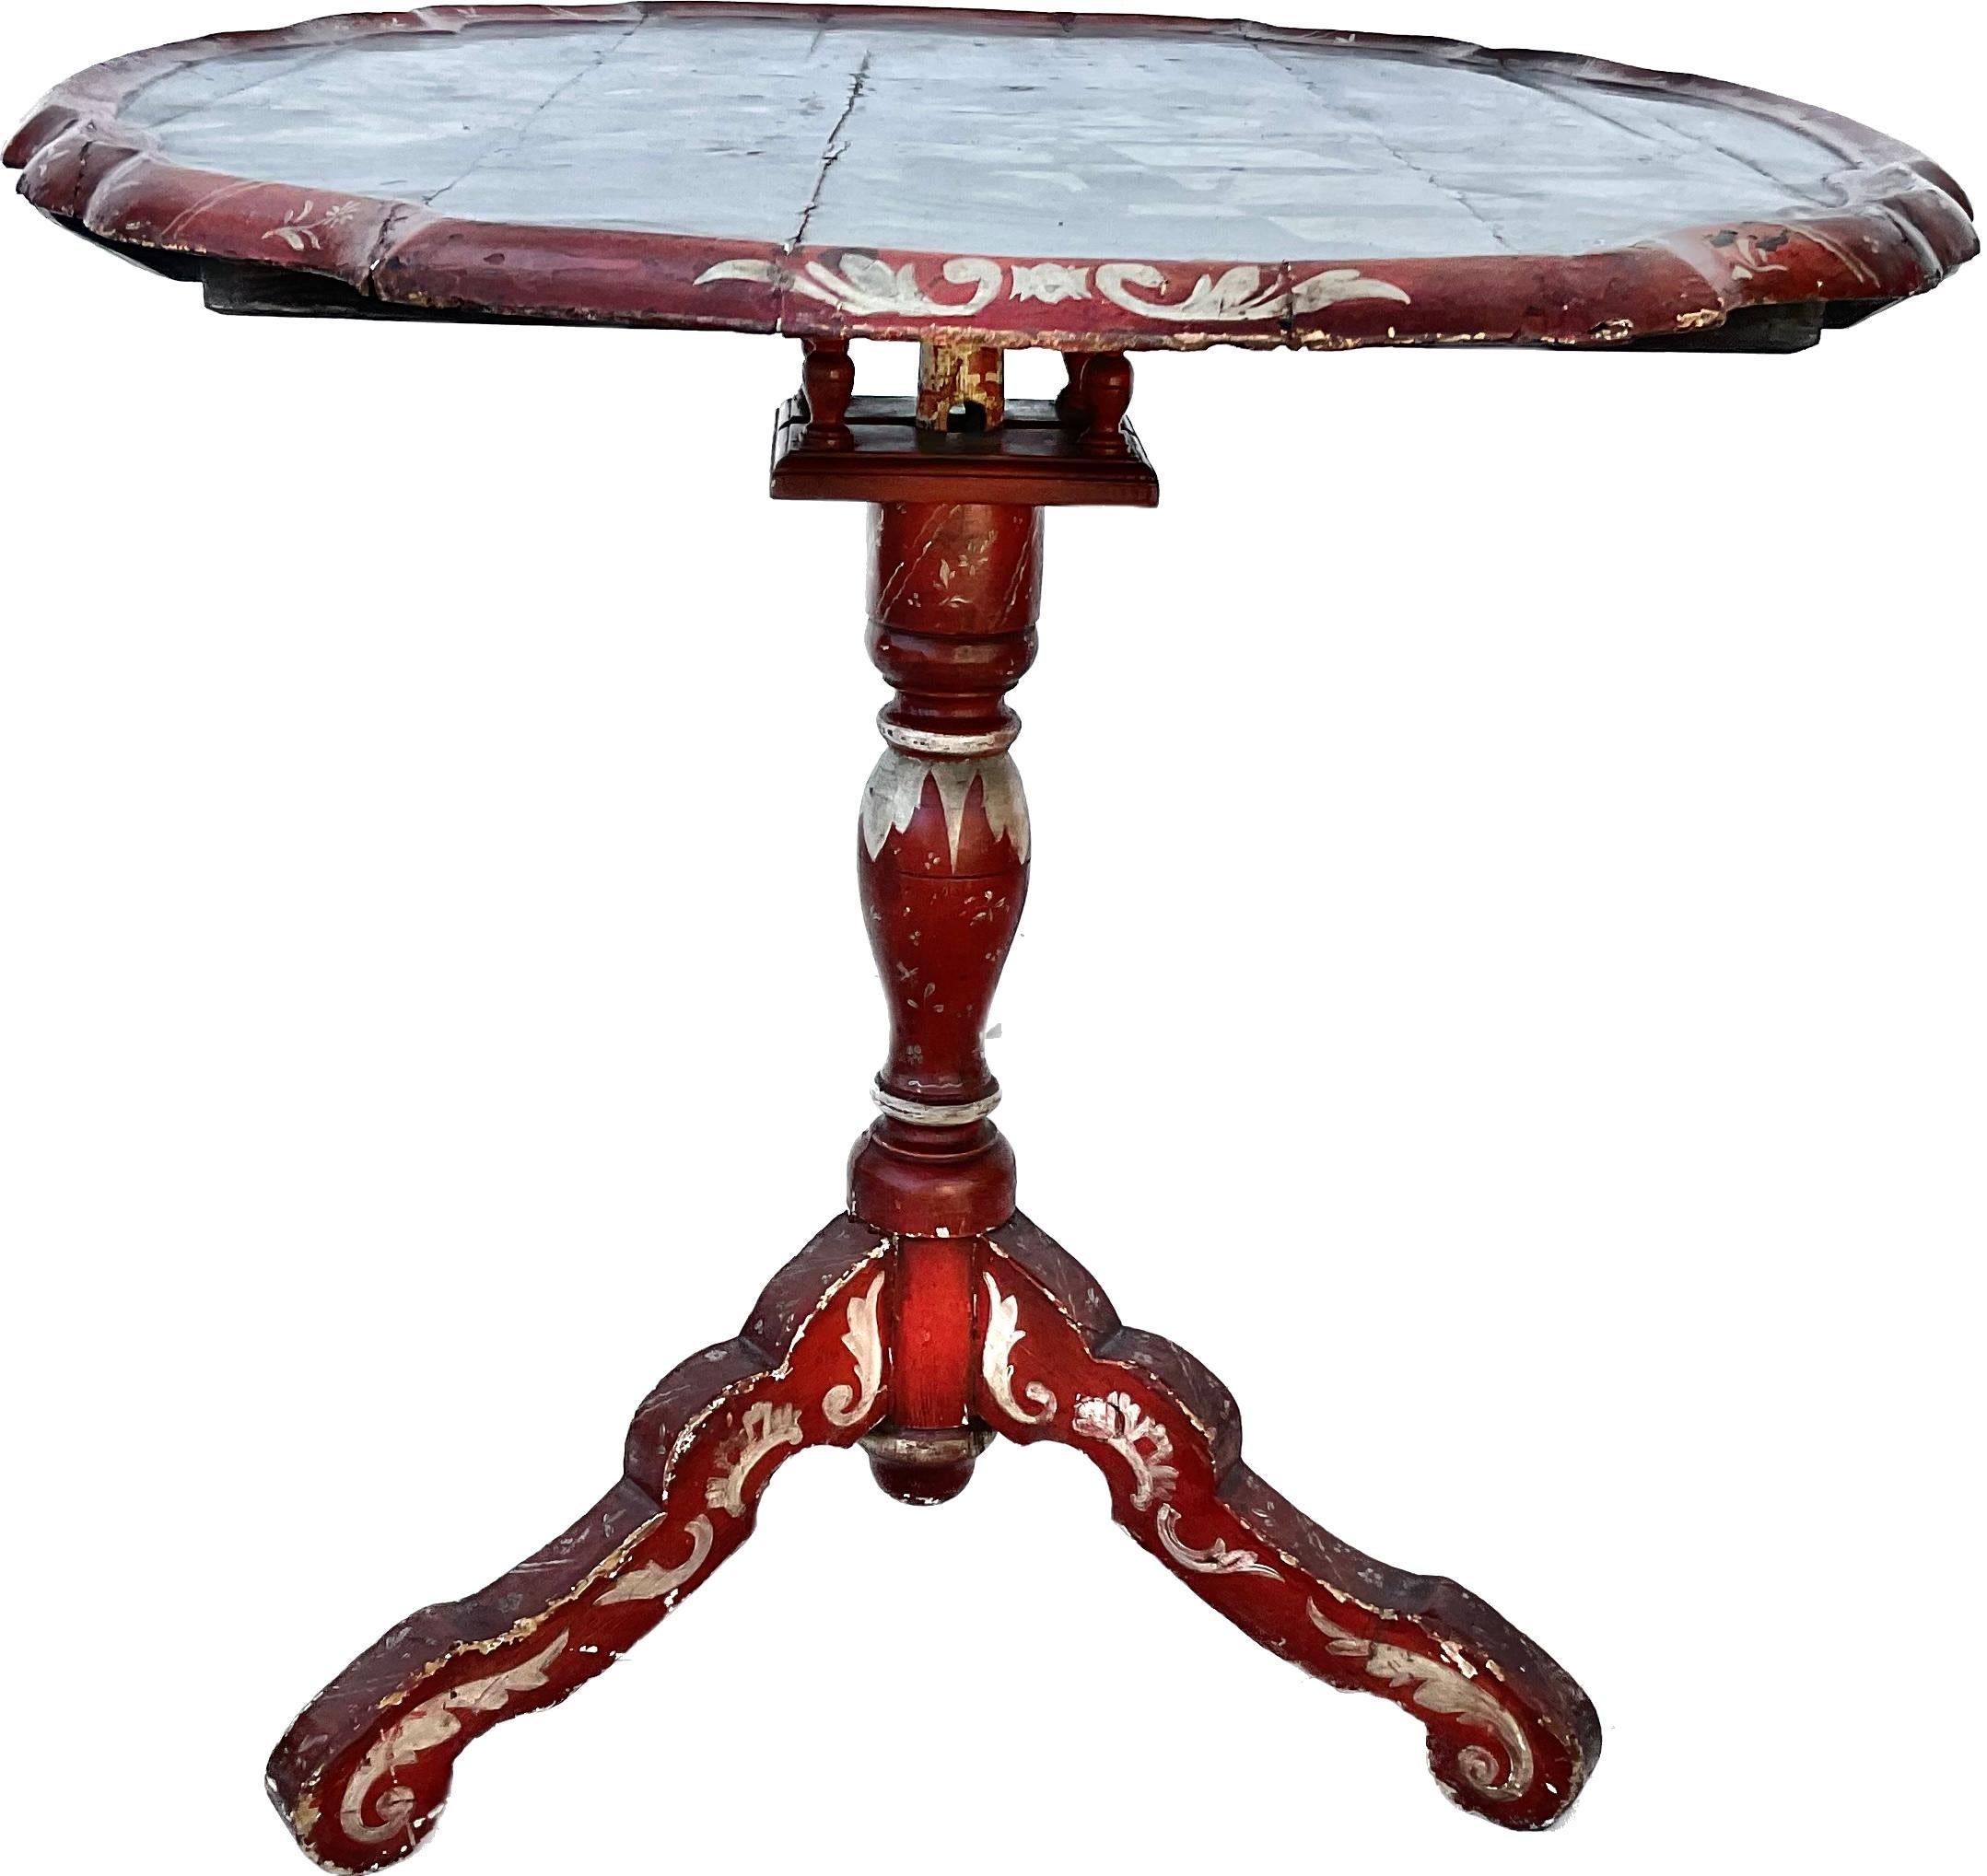 Dutch painted tilt top table with a dished oval marbleized top decorated with a scene of merrymakers frolicking in a theater. Red painted tripod Base and Bird Cage. Late 18th century Dutch, Ameland circa 1780.